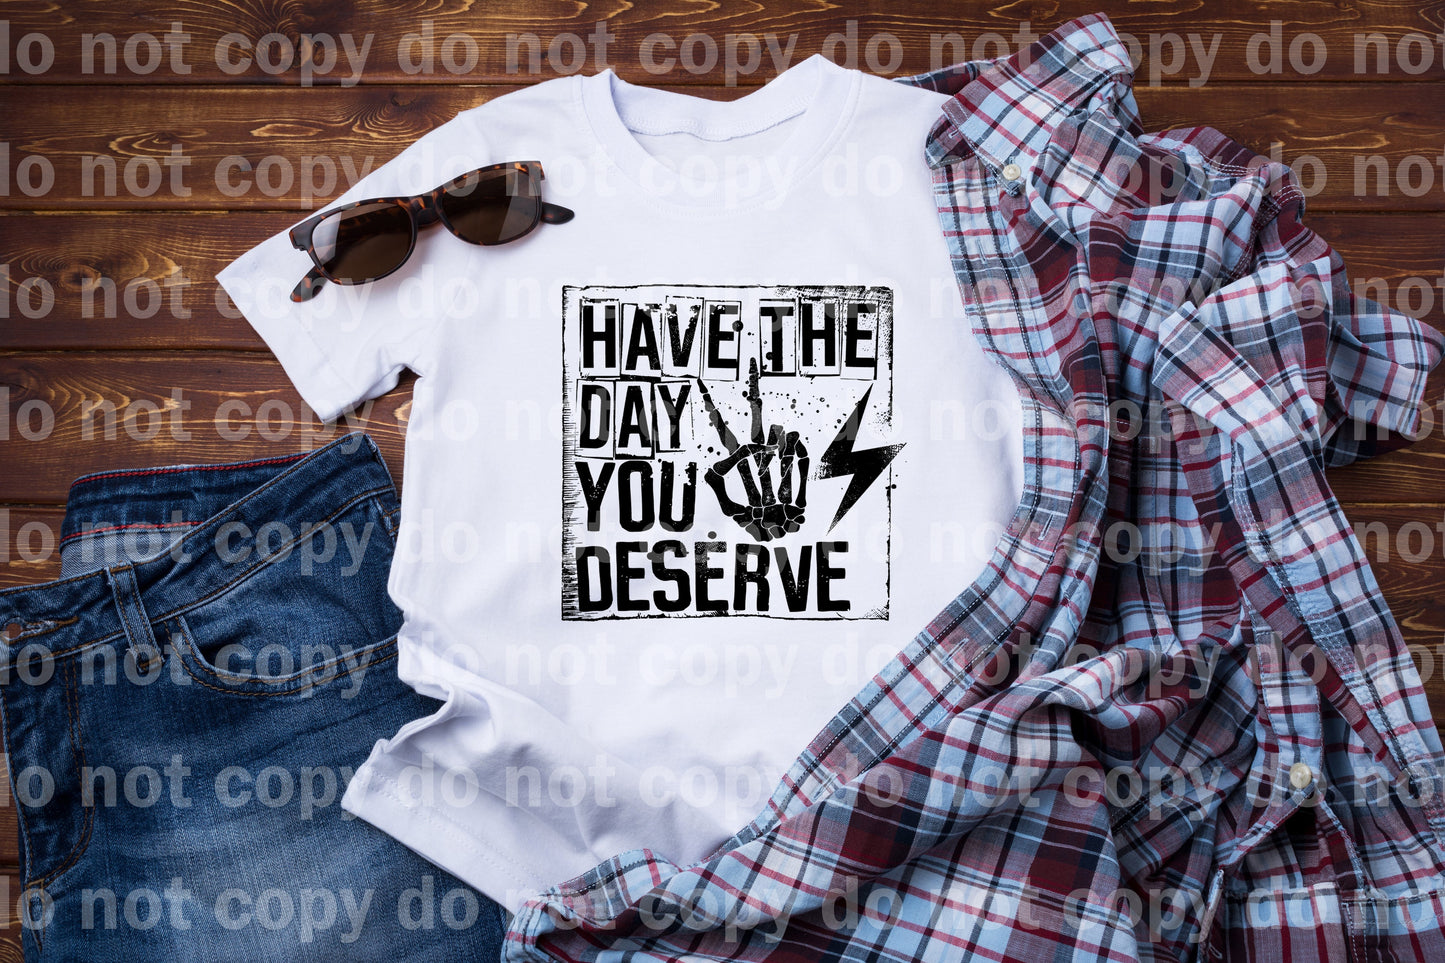 Have The Day You Deserve Skeleton Hand Dream Print or Sublimation Print